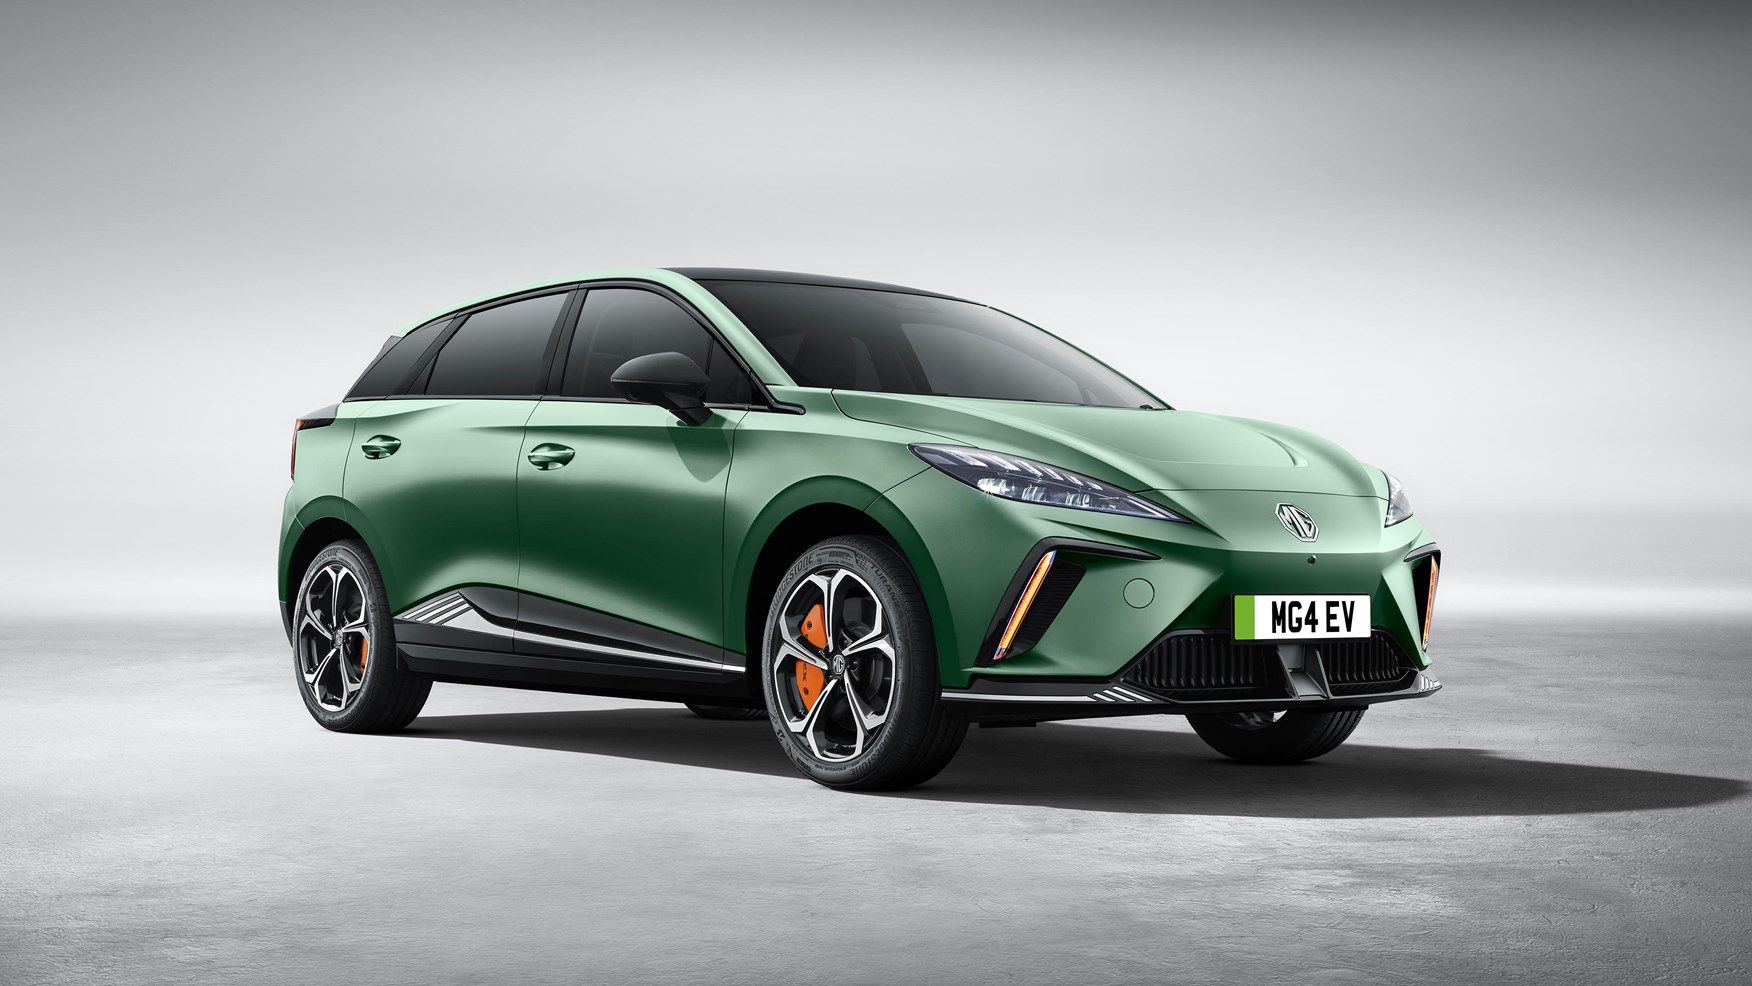 The MG4 EV Will Battle Electric Hatches in Europe